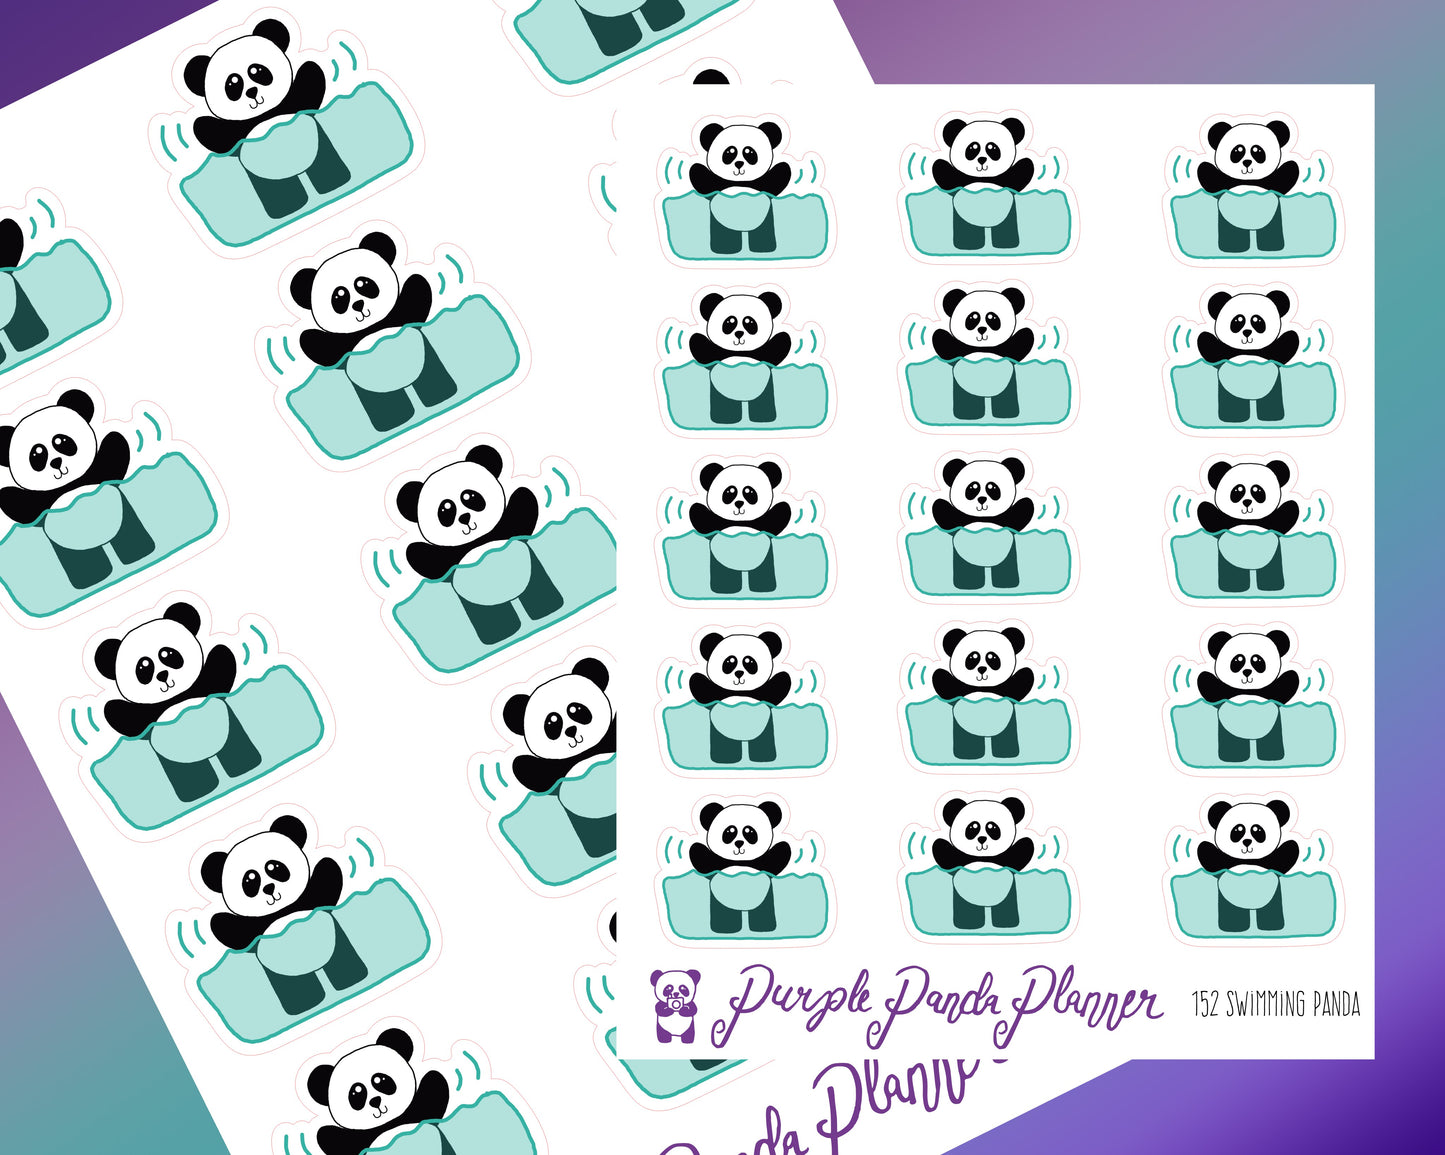 Swimming Panda 152 Planner or Bullet Journal Stickers for Functional Planning